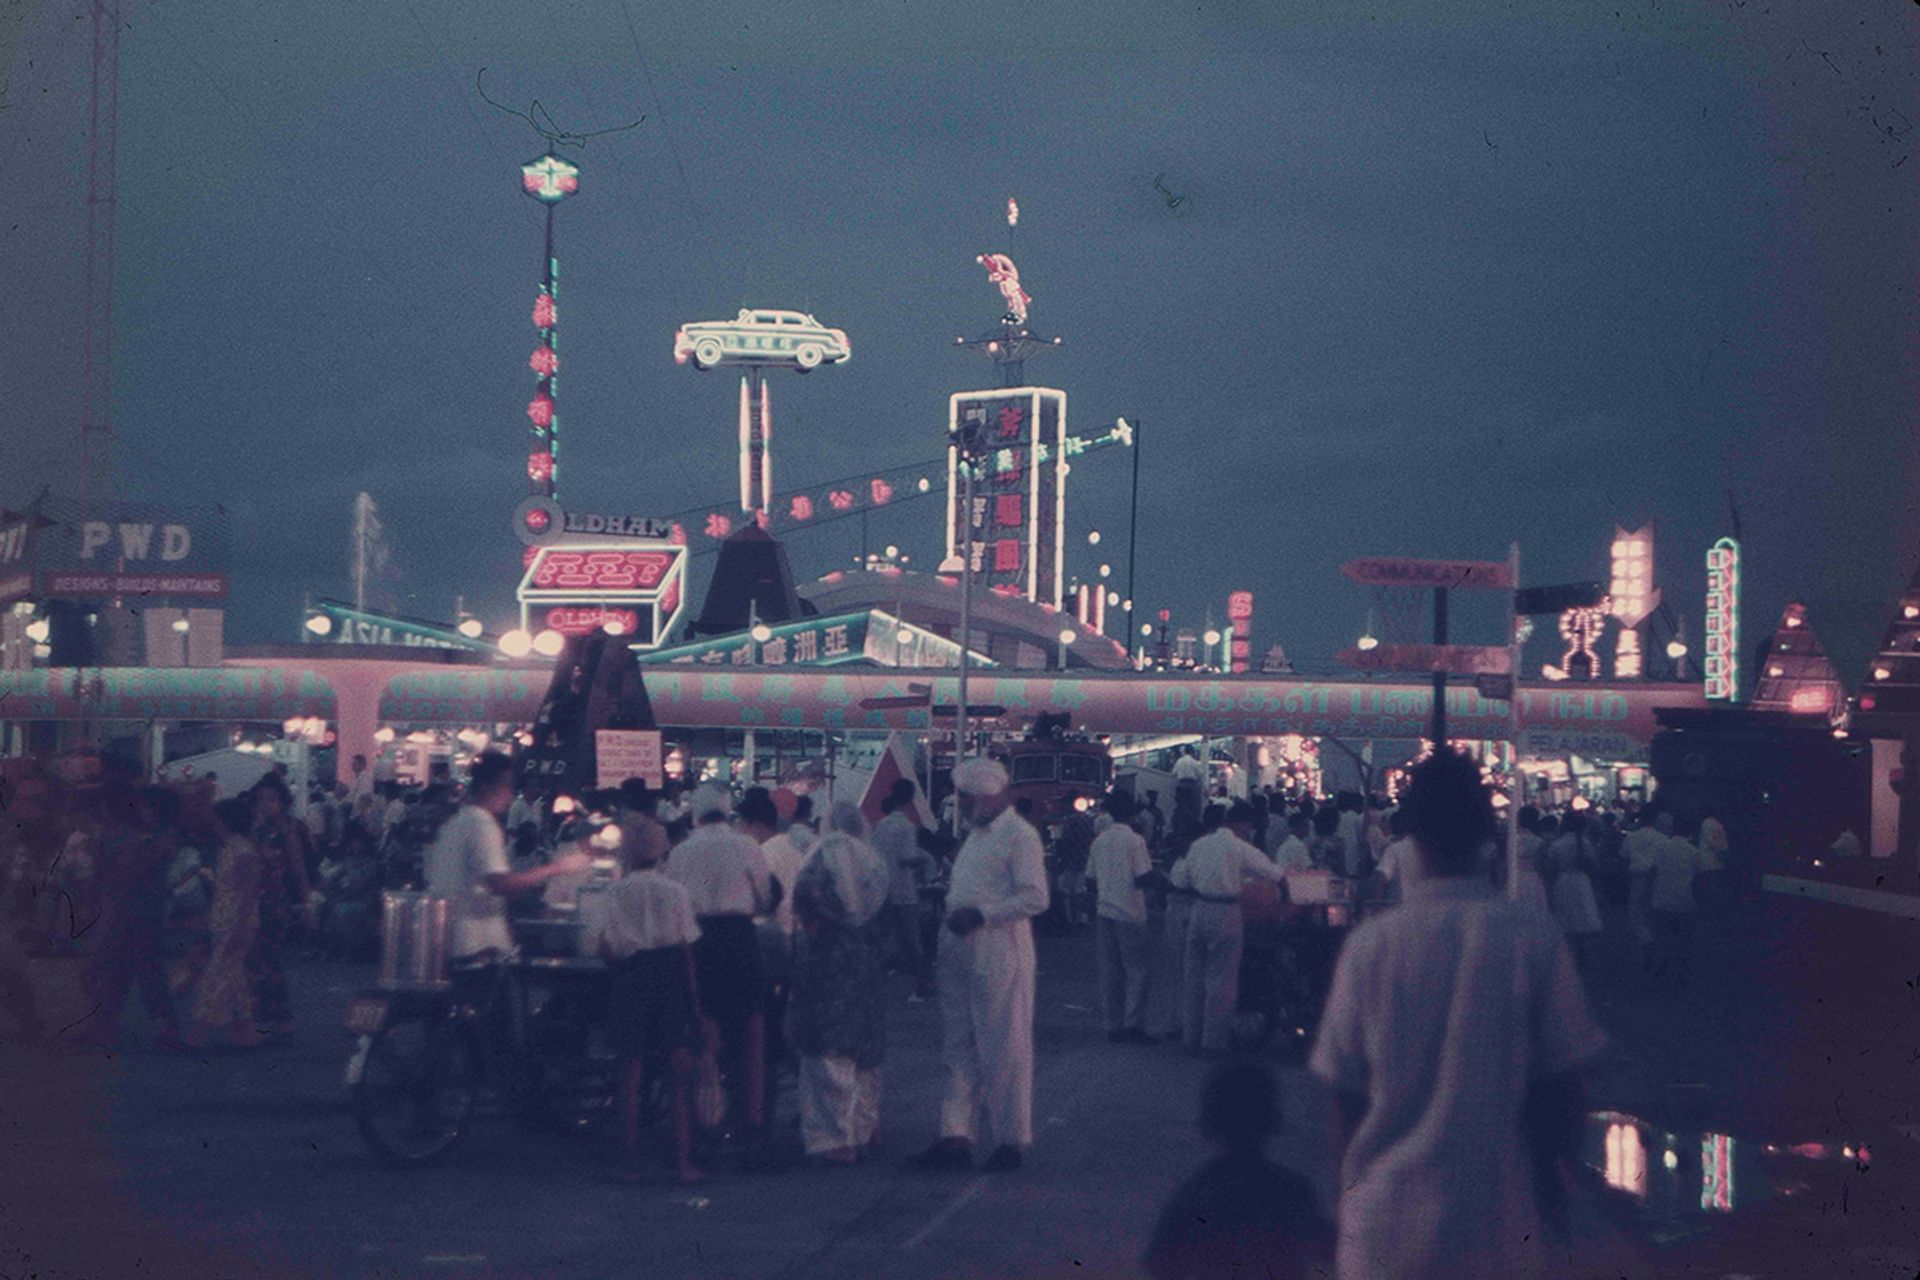 When the new Paya Lebar Airport opened in August 1955, a large space was vacated at the old Kallang Airport. One of the first events to be hosted there was the Singapore Agricultural Show, held from June 30 to July 6, 1956.